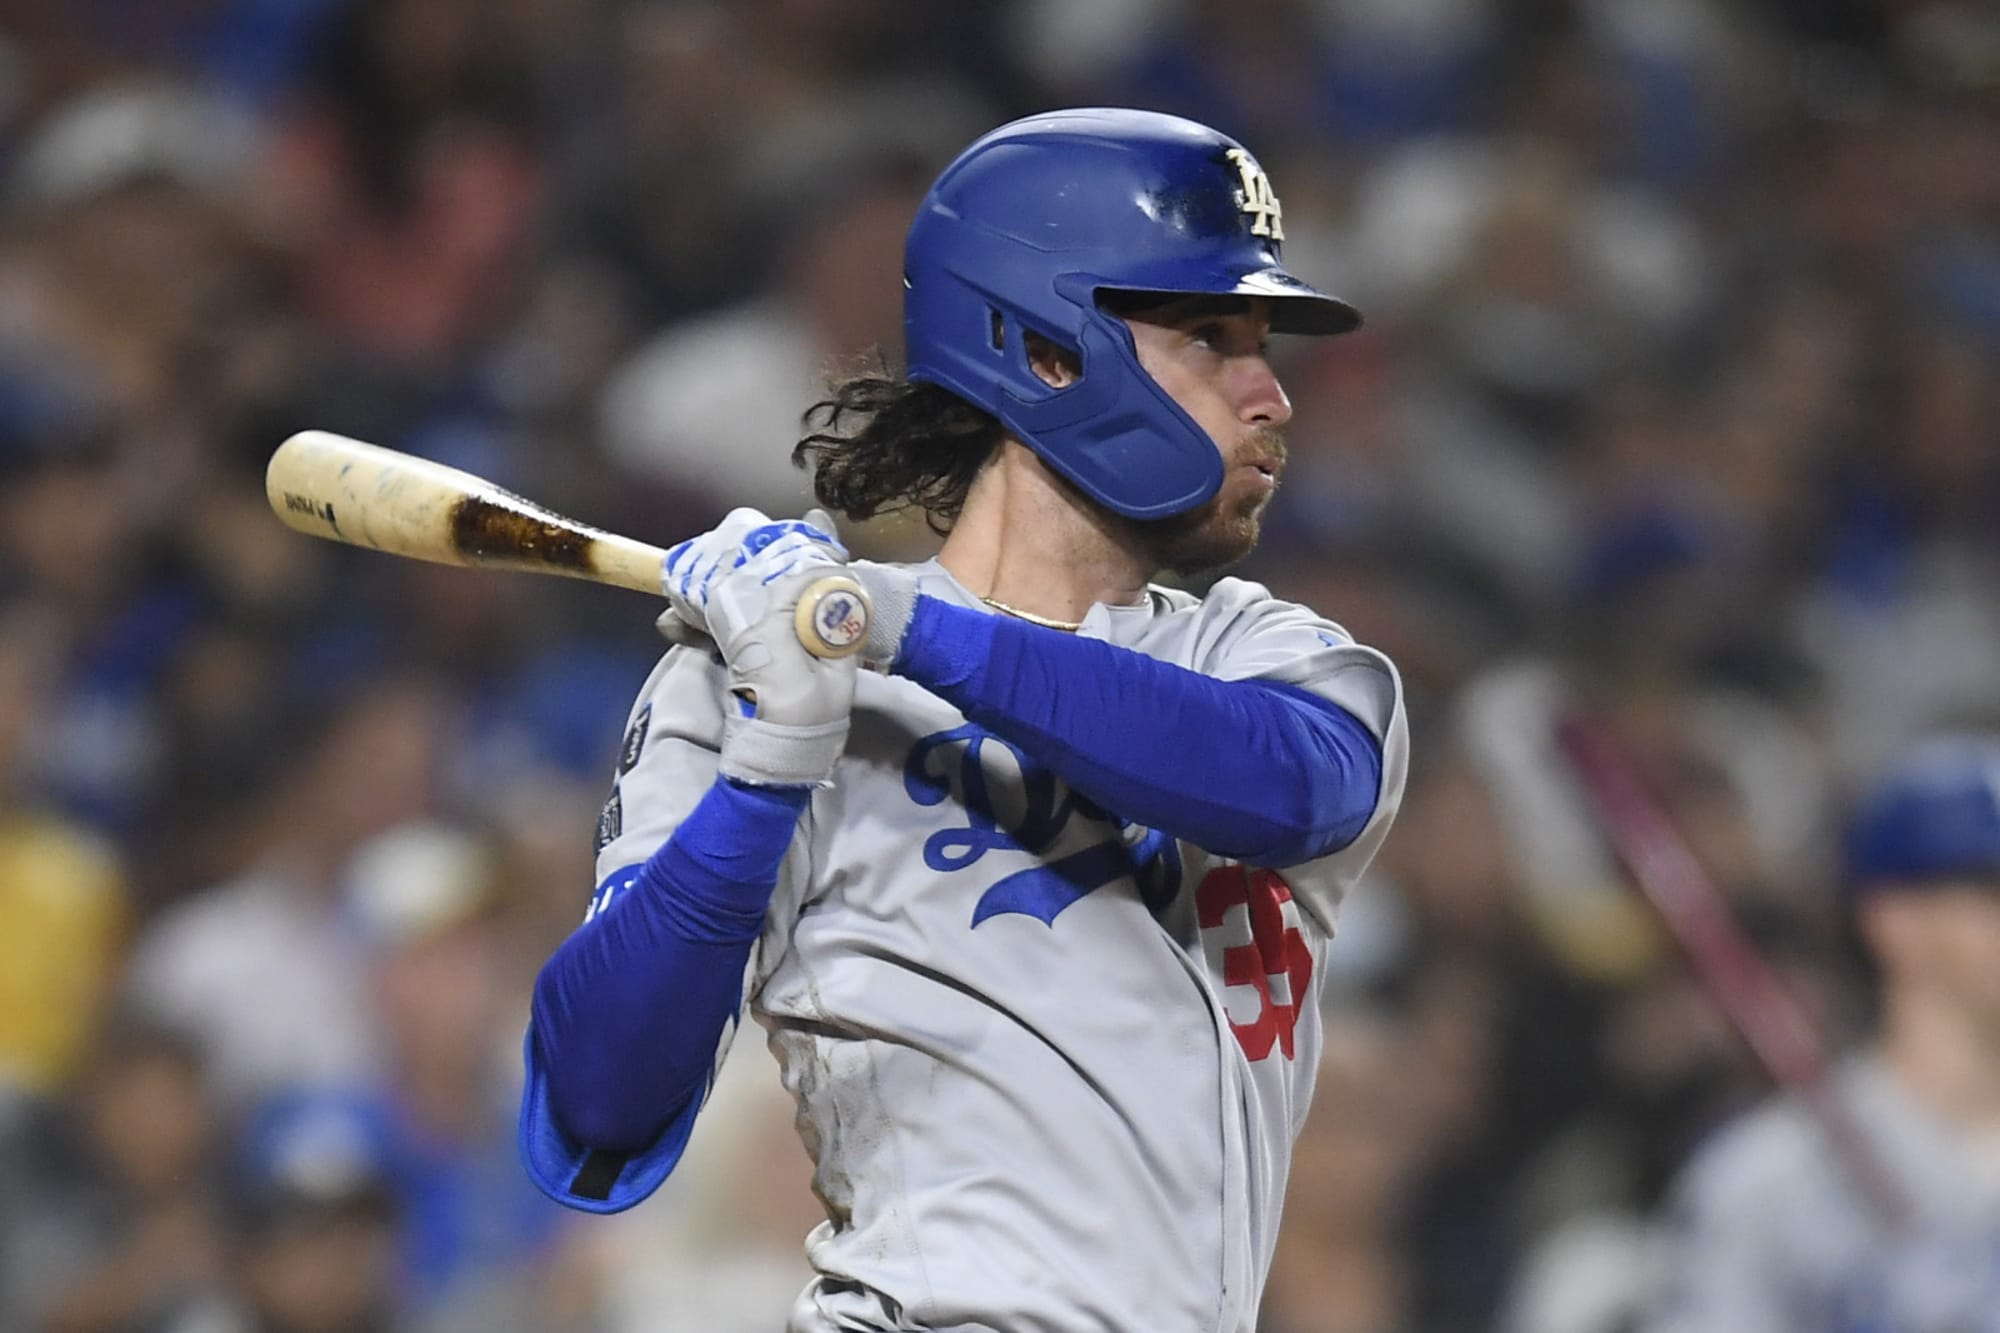 This YankeesDodgers Cody Bellinger trade could actually work